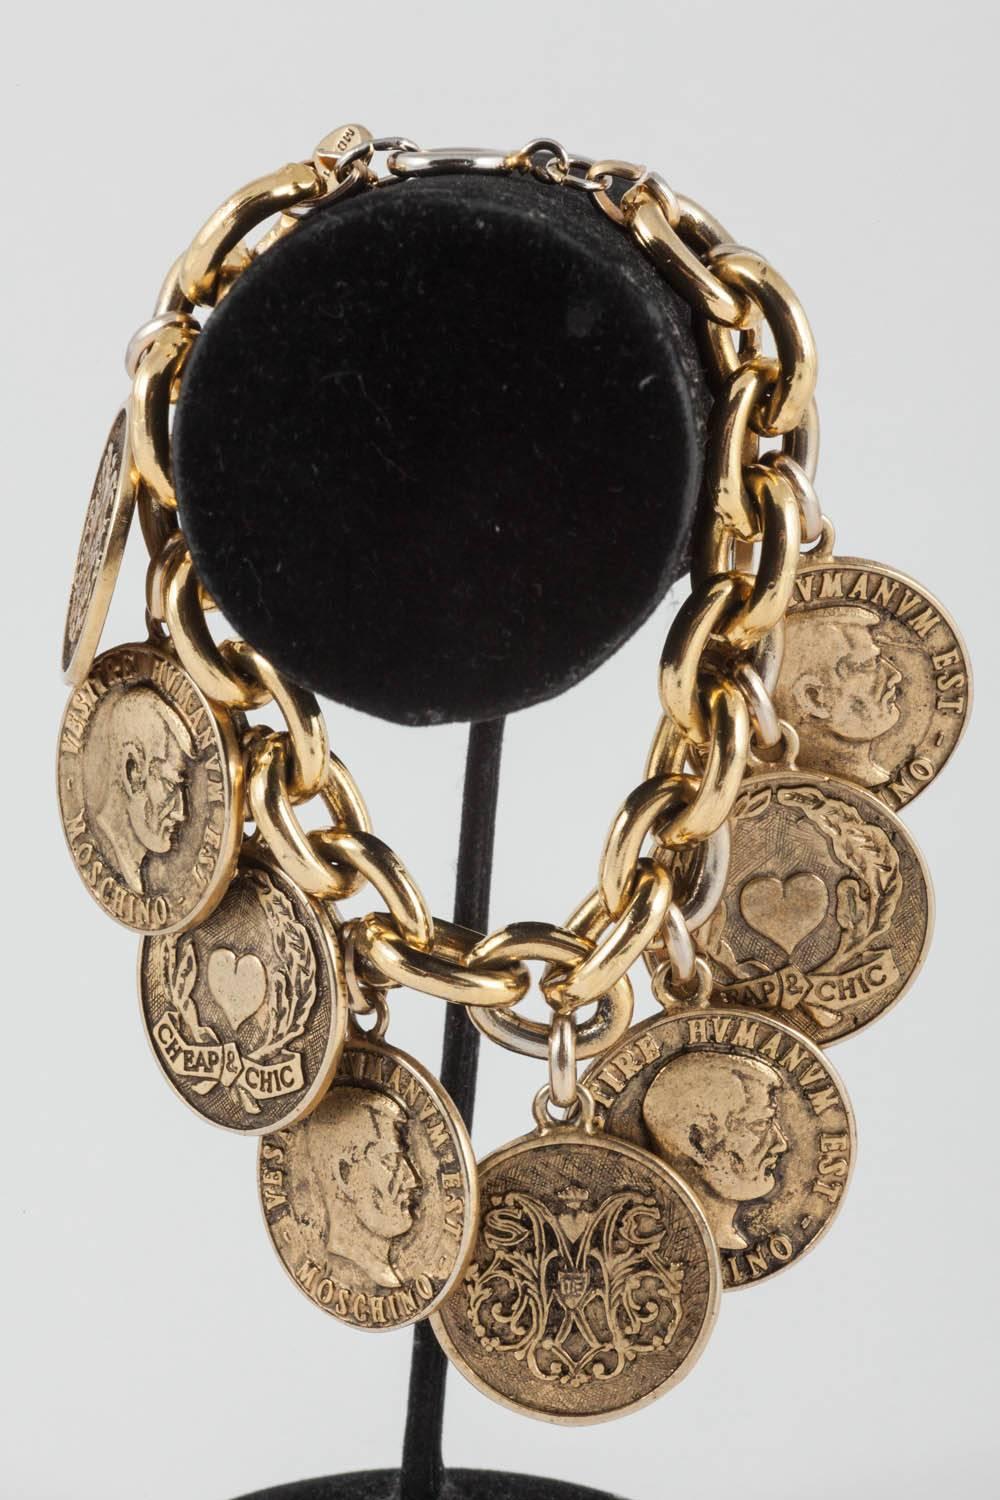  Early 'Cheap and Chic' antiqued gilt coins charm bracelet, Moschino, 1990s  4